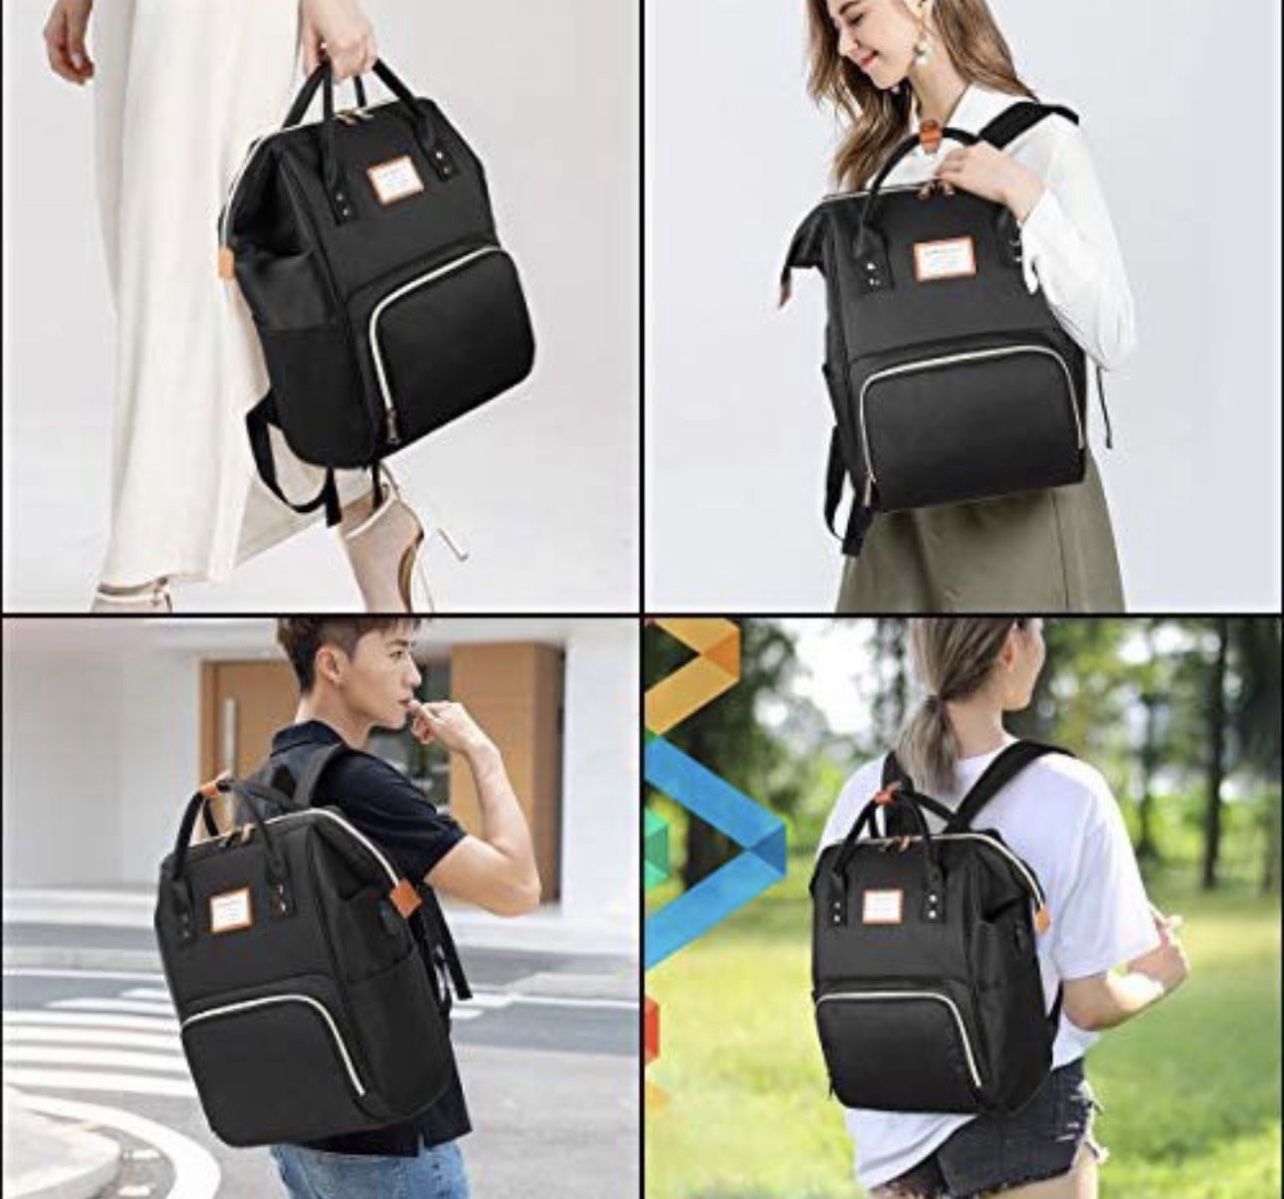 New SOWAOVUT bag or Laptop Backpack 15 Inch Casual Daypack Water Resistant